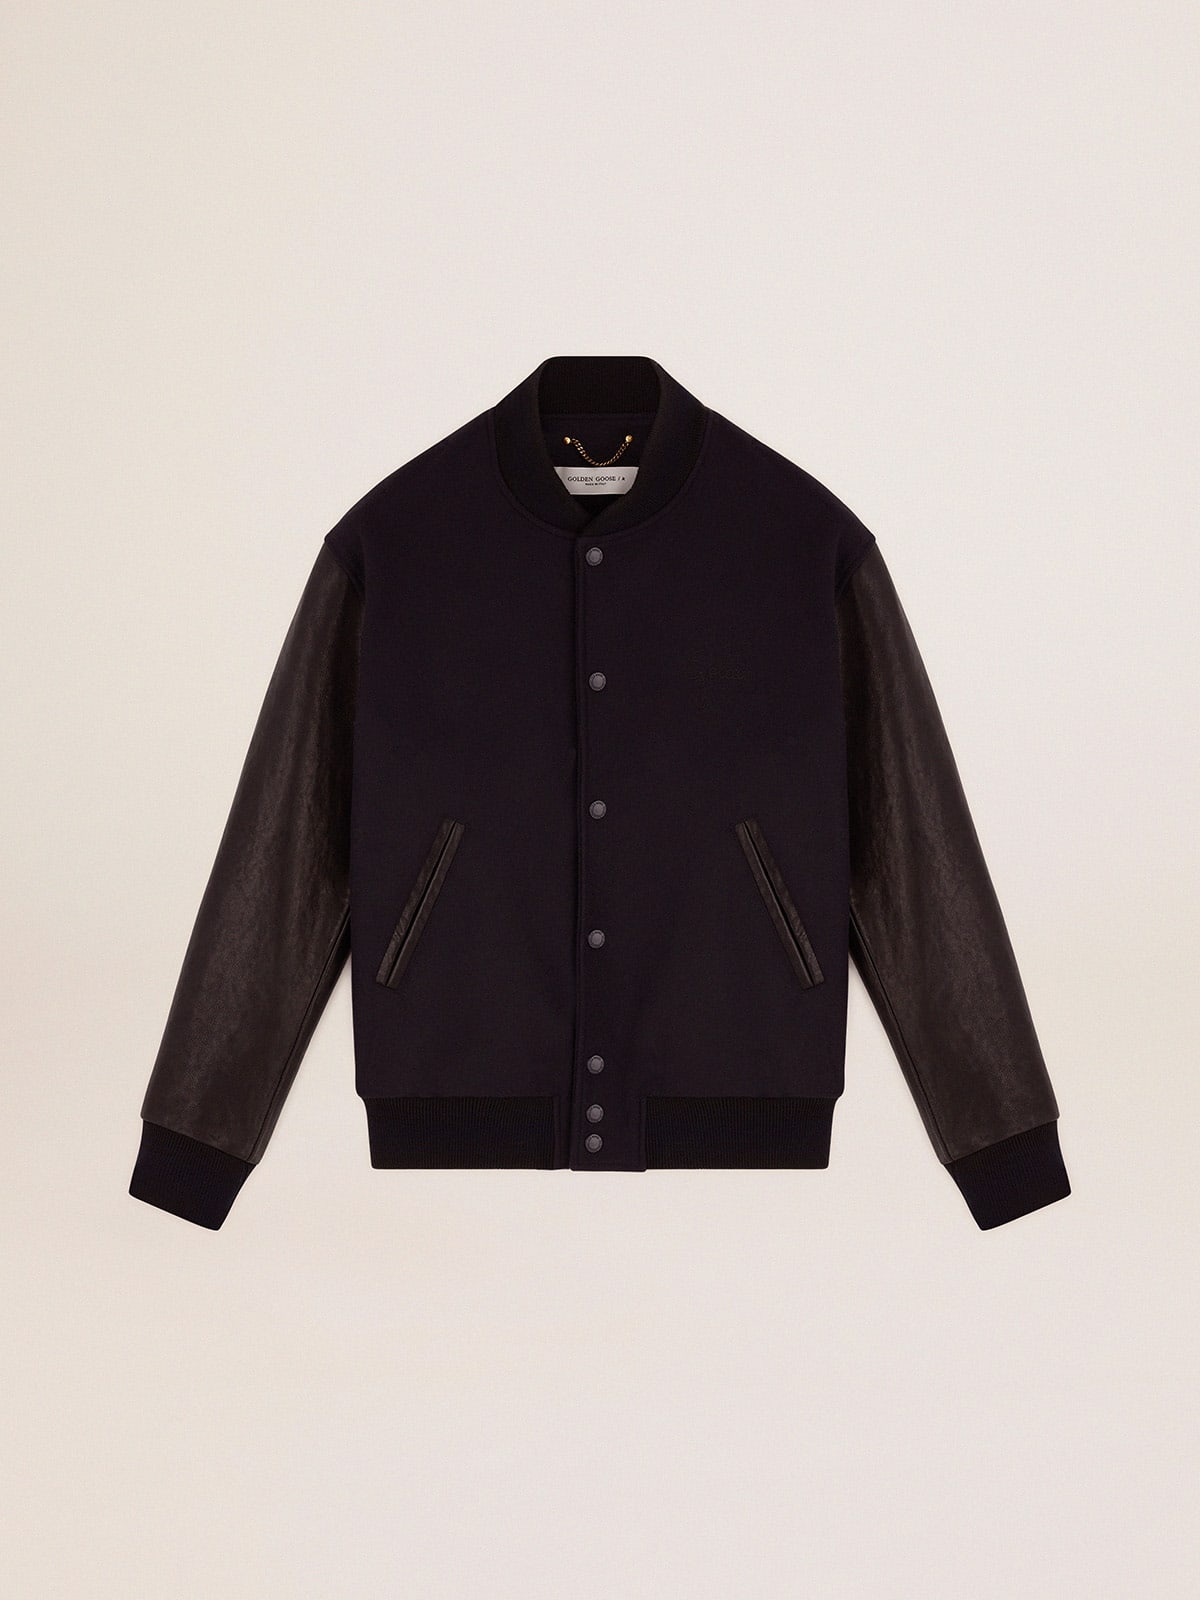 Men's bomber jacket in dark blue wool with leather sleeves - 1